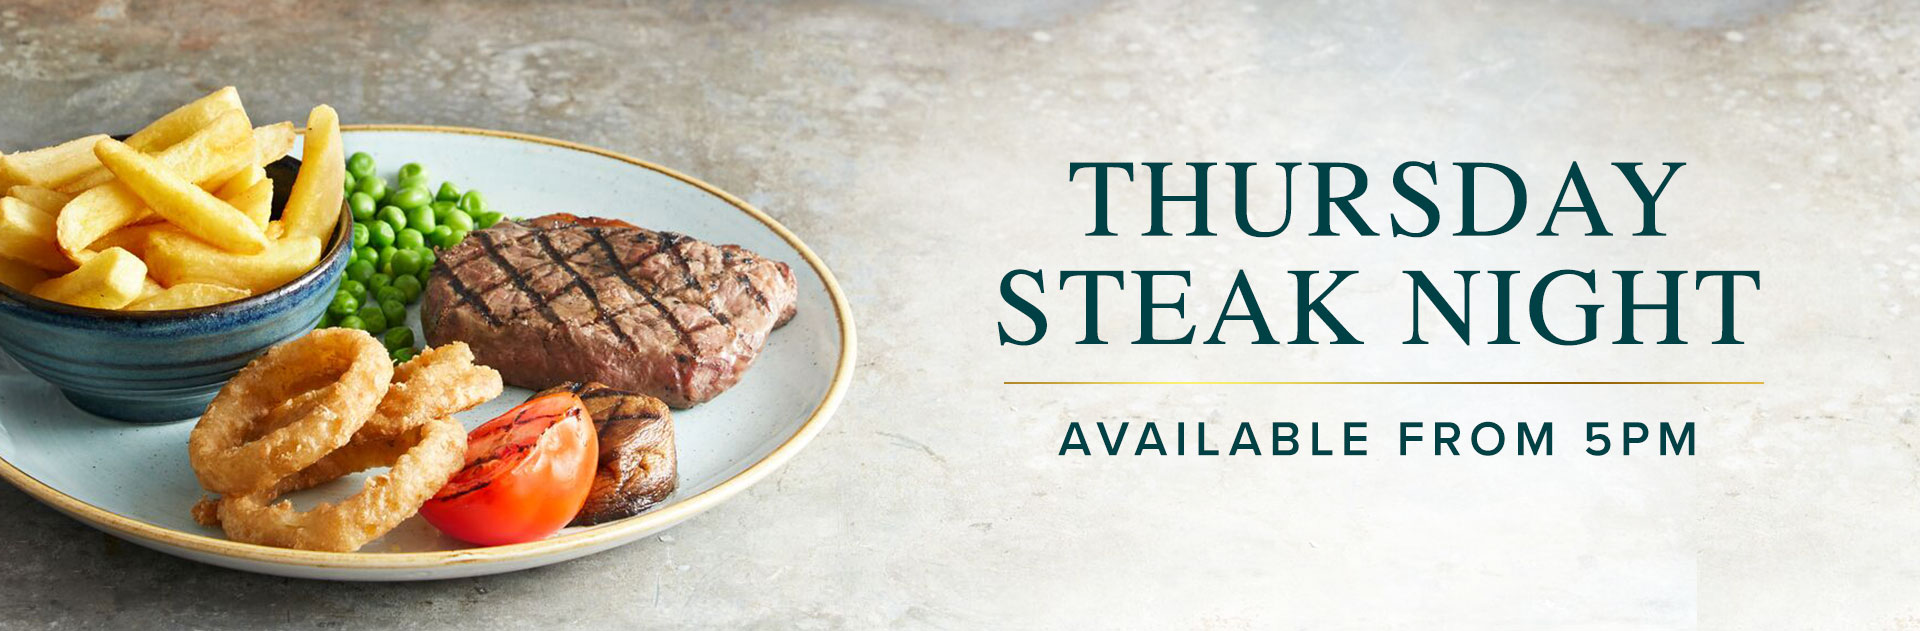 Thursday Steak Night at The Anderton Arms